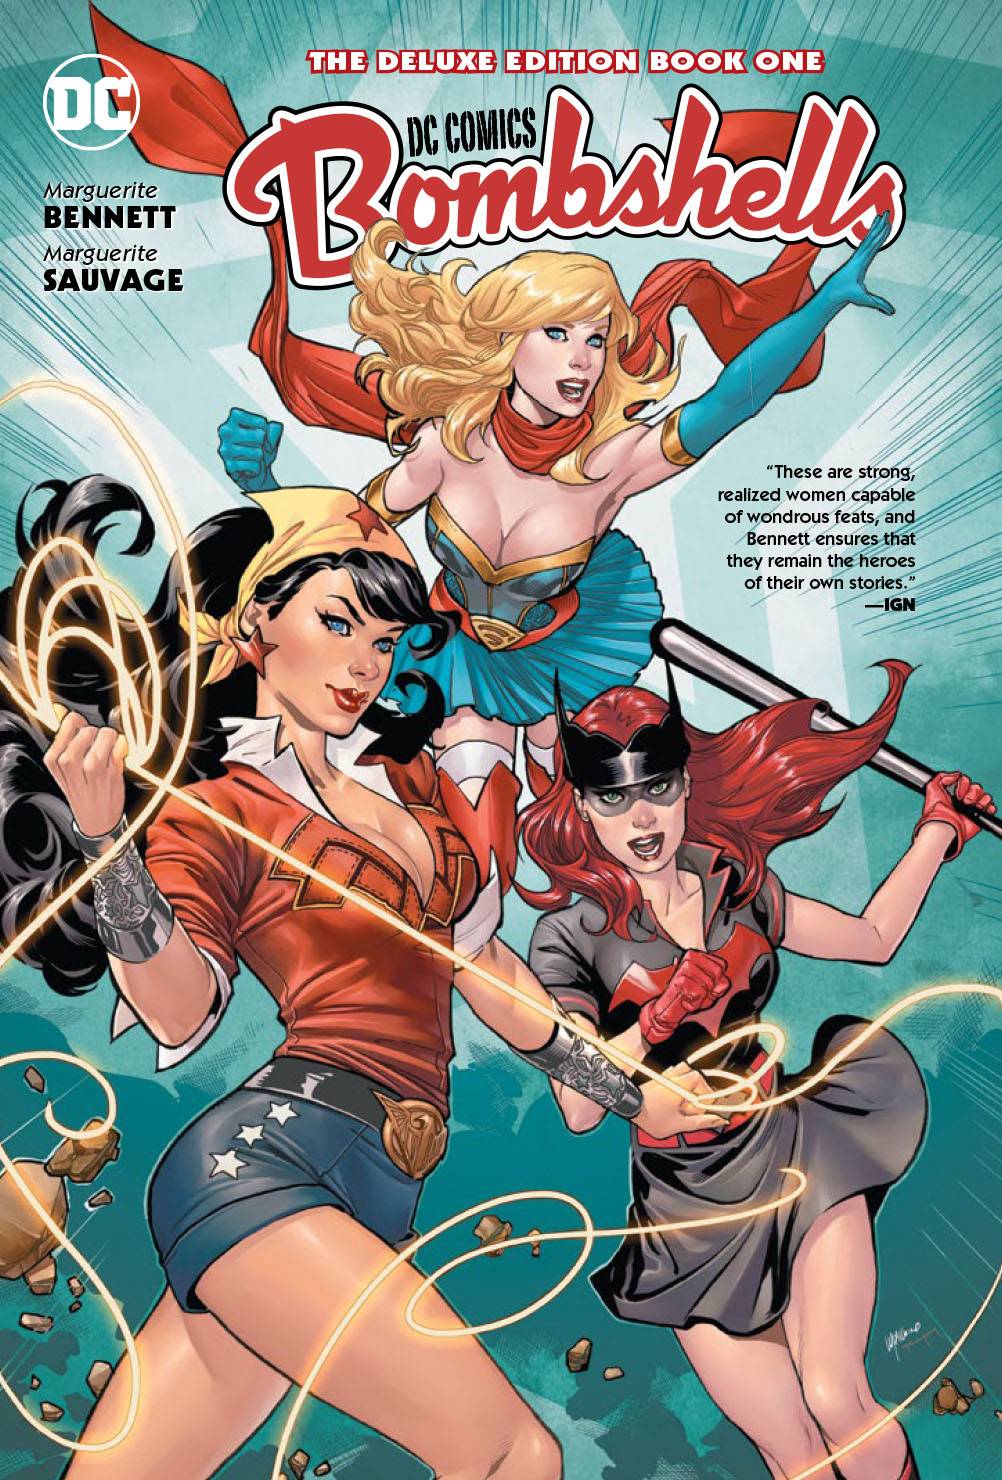 DC Bombshells The Deluxe Edition Hardcover Book 1